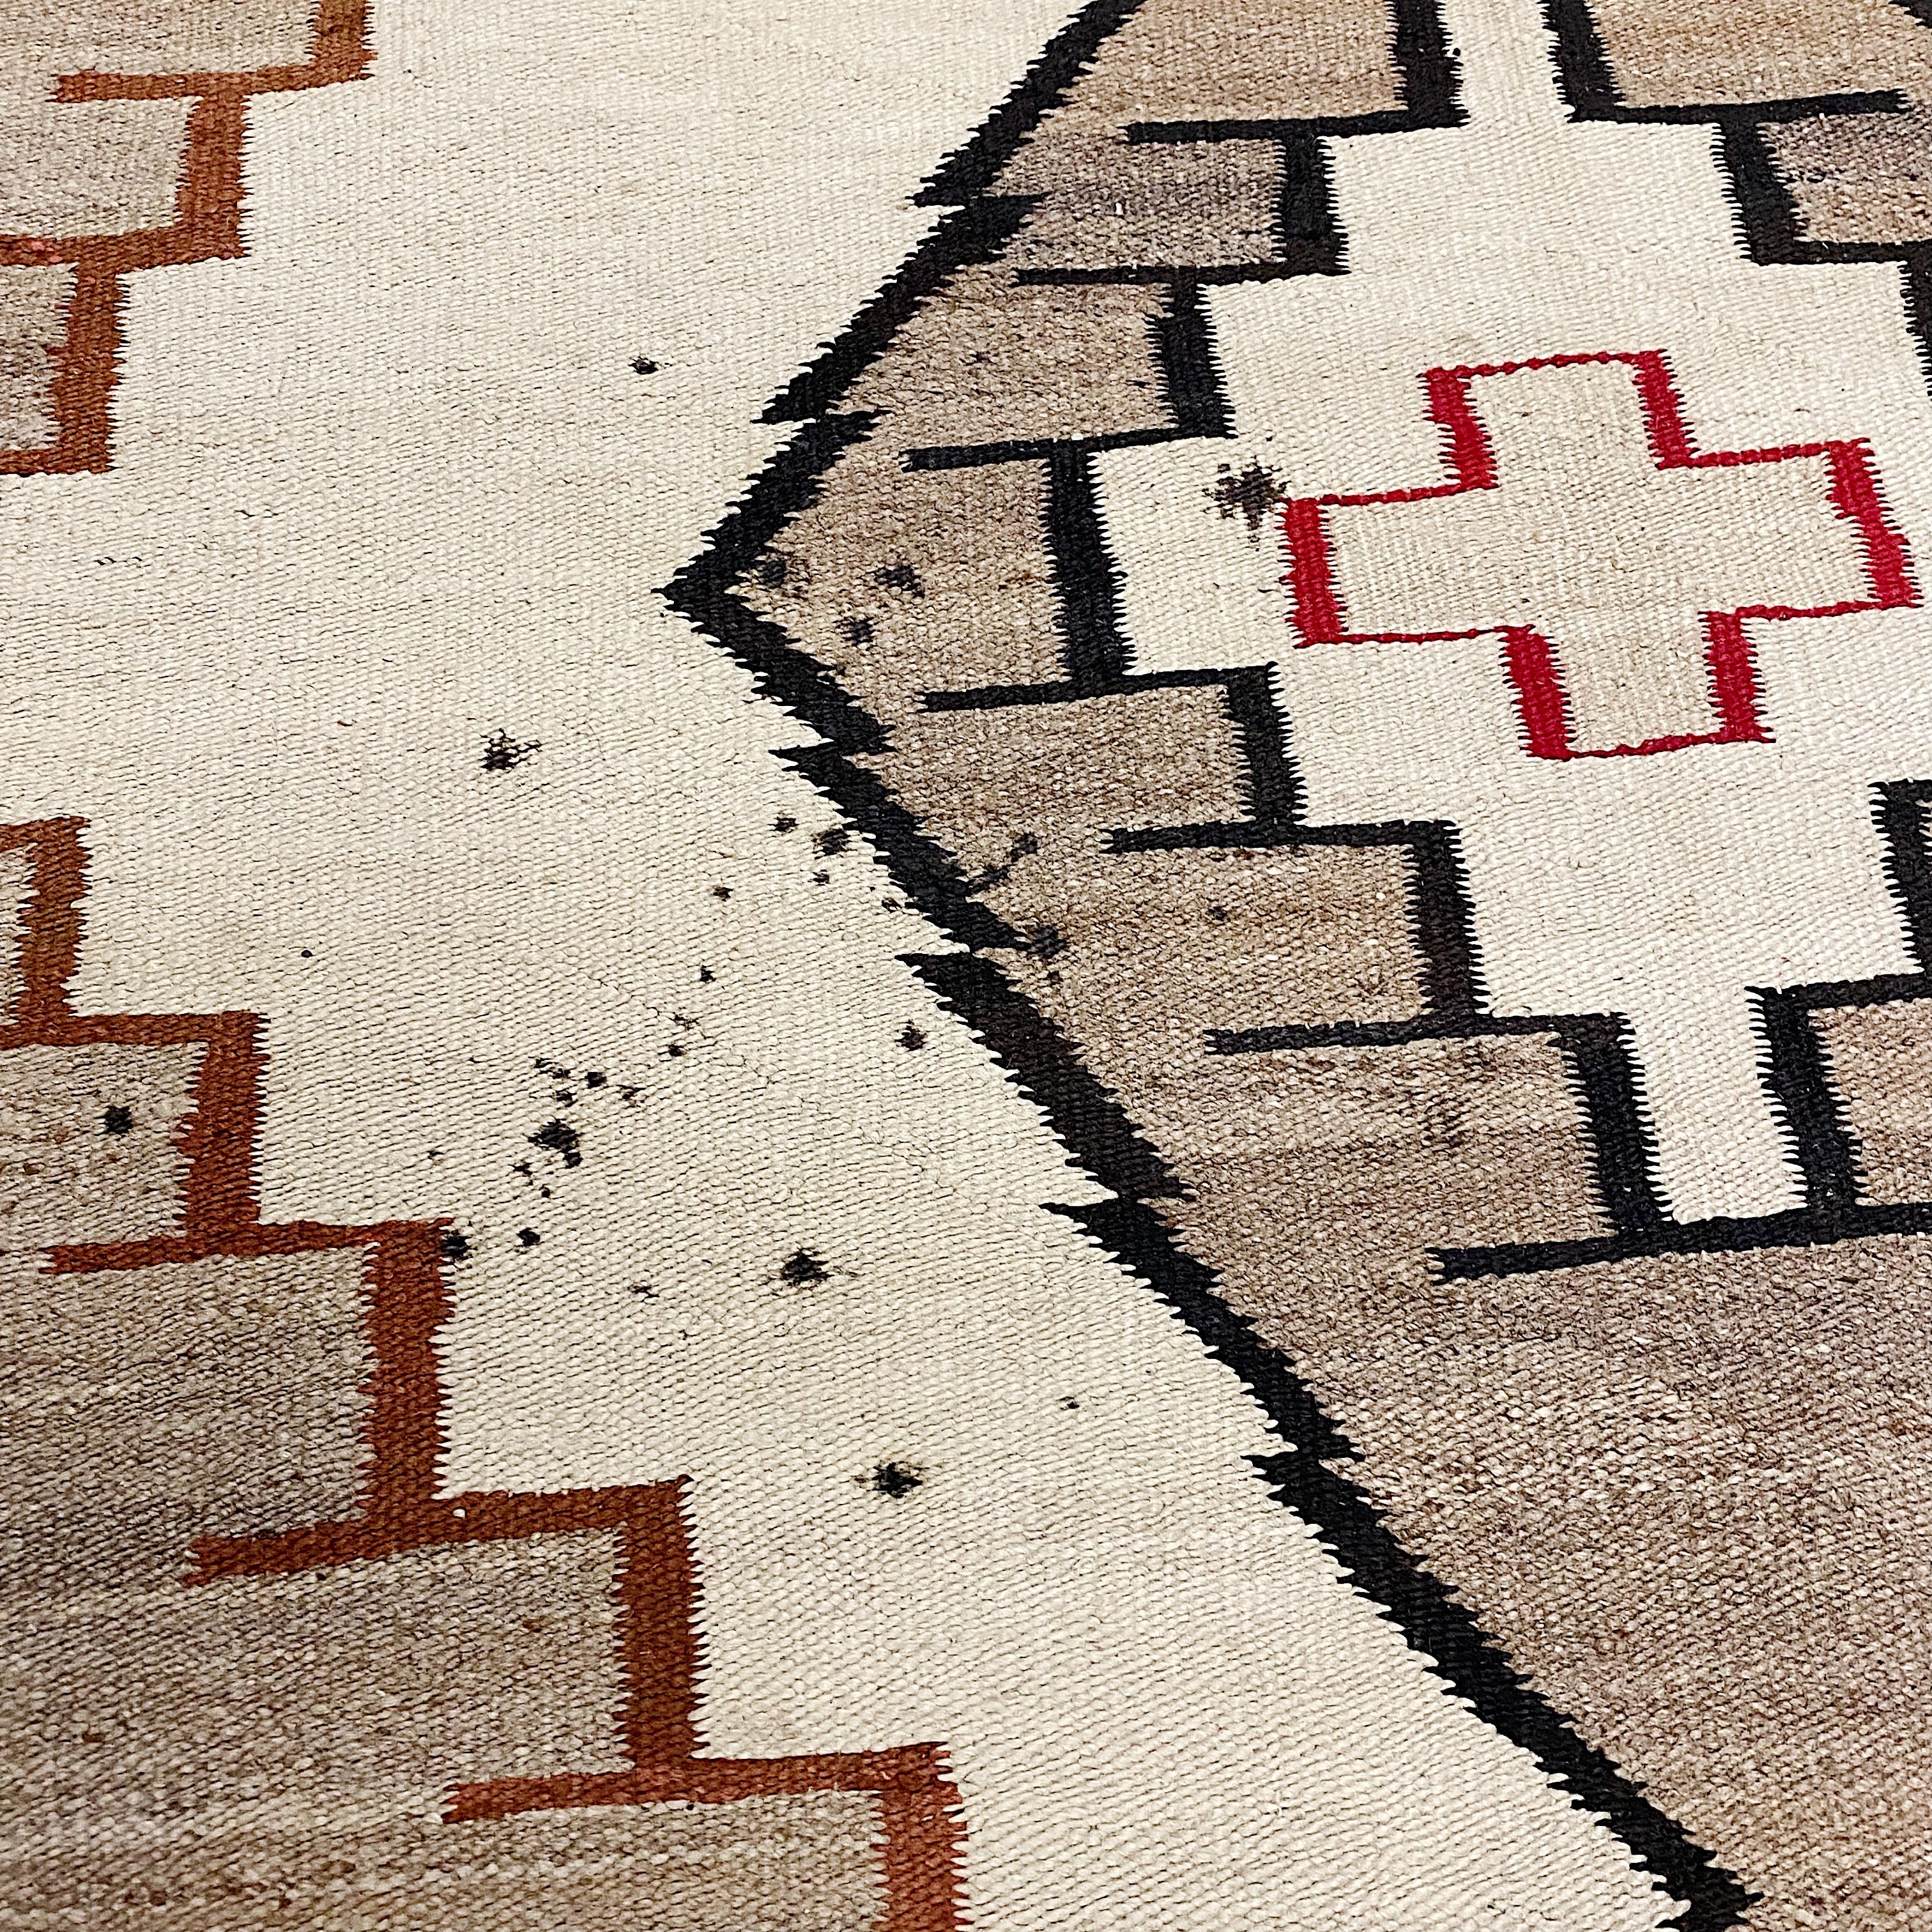 Antique Navajo Rug with Red Crosses and Geometric Design | 1920s